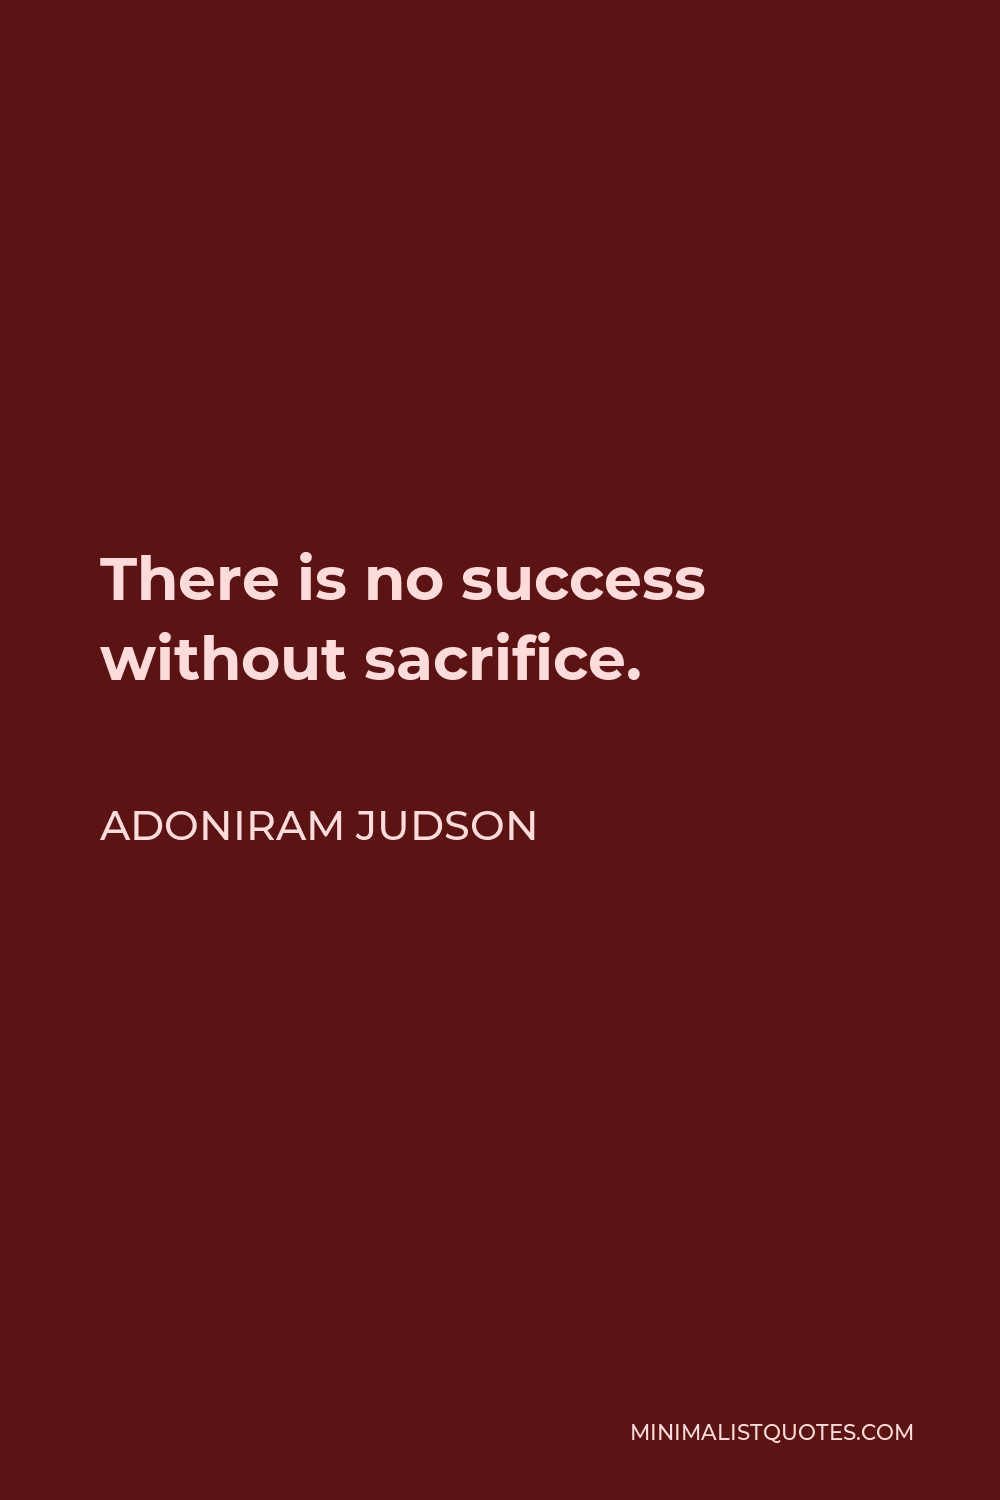 Adoniram Judson Quote - There is no success without sacrifice.